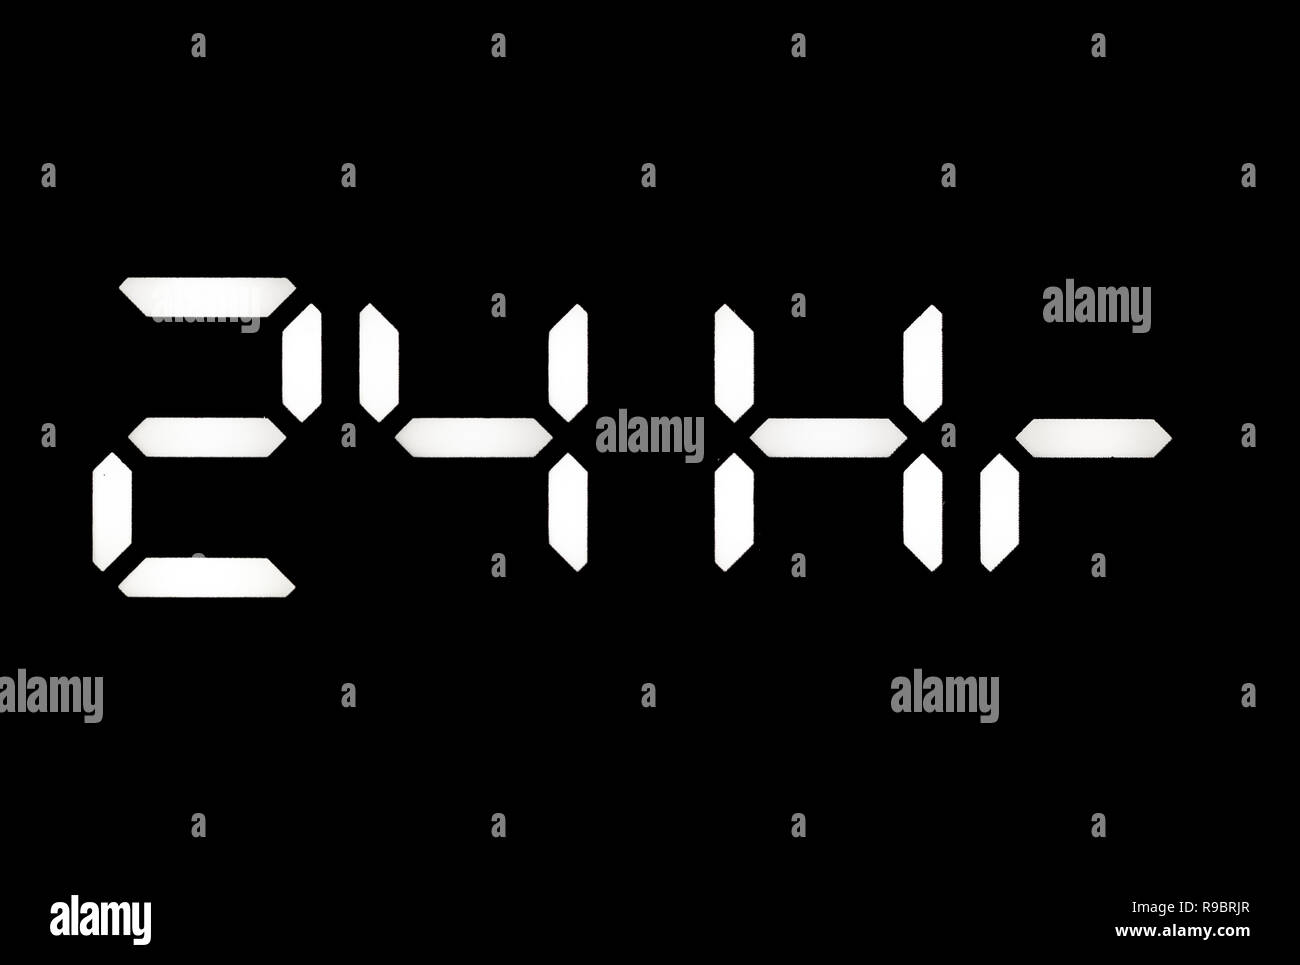 Real white led digital clock on a black background showing 24Hr Stock Photo